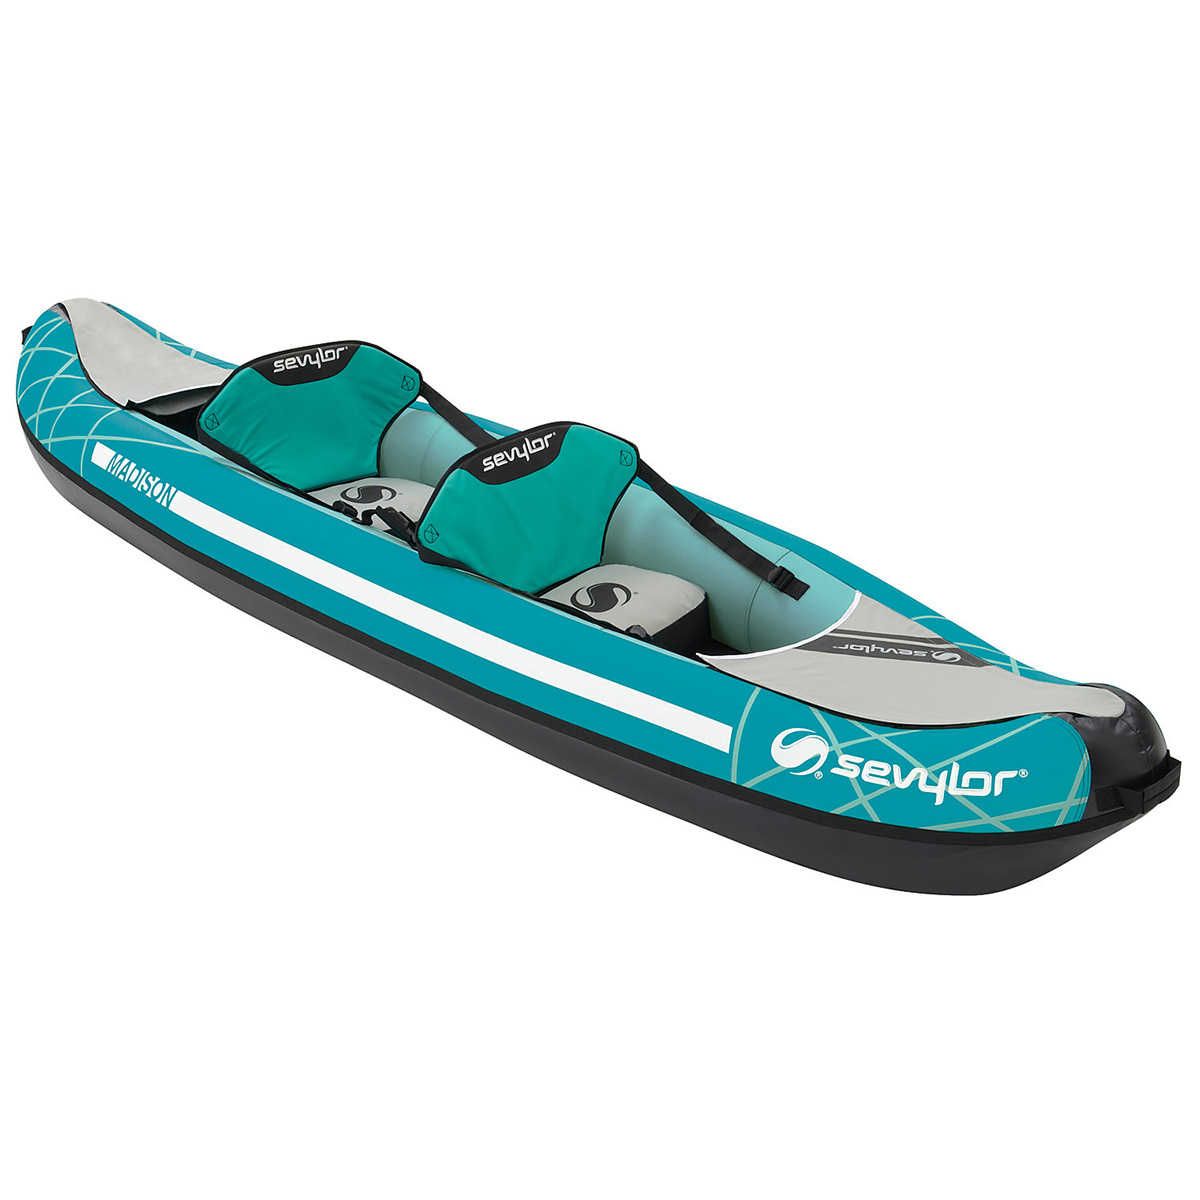 Kayak Gonflable Madison - 2 personnes - Vert 1